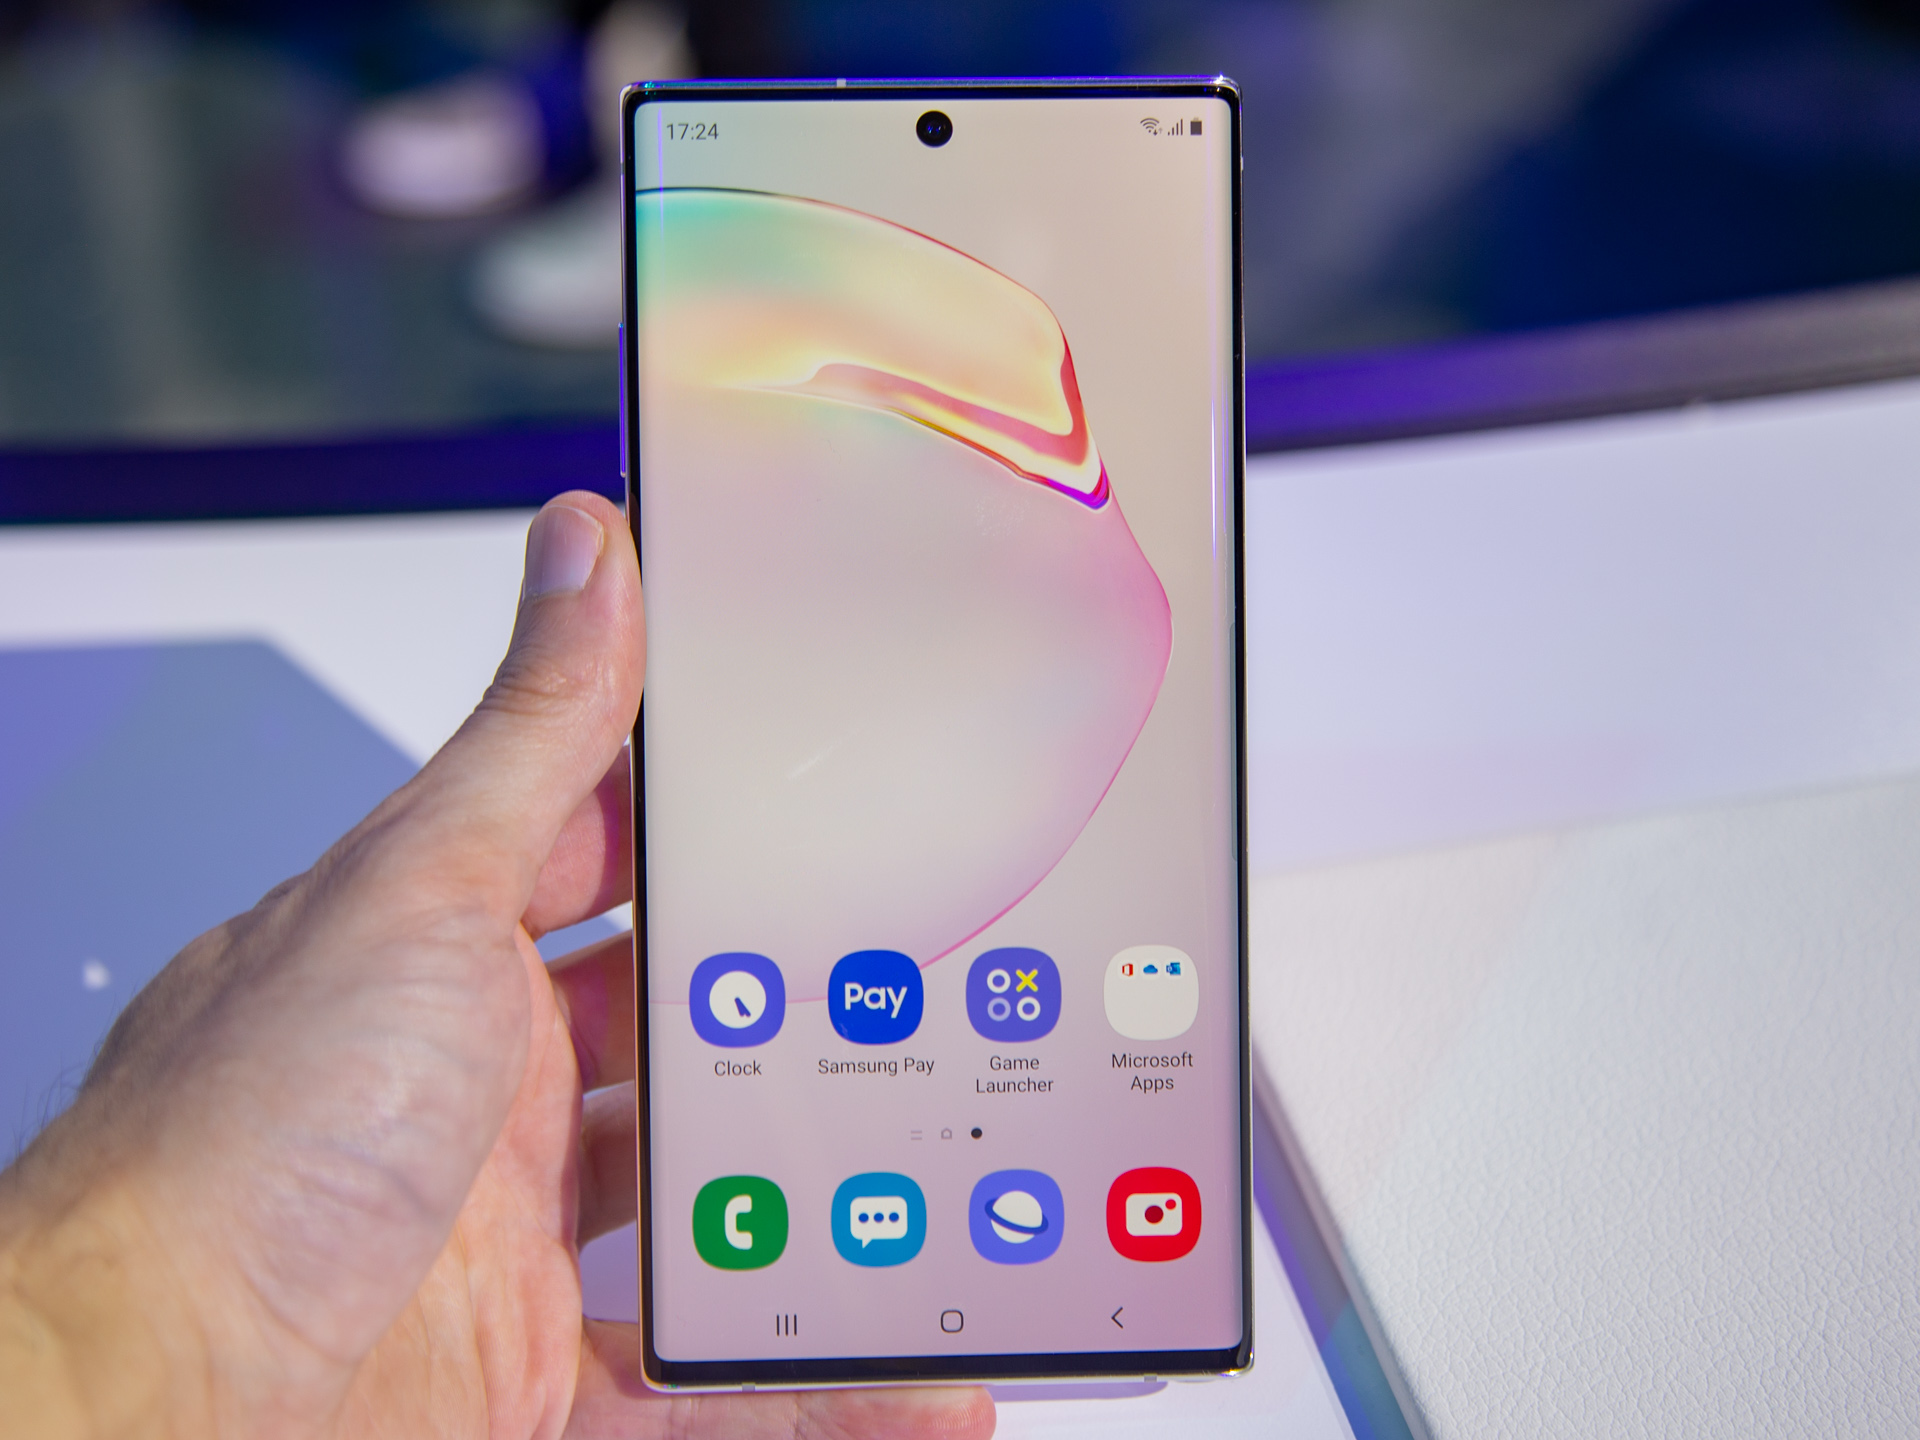 Hands-on with Samsung's Galaxy Note 10 and Note 10+ Android phones